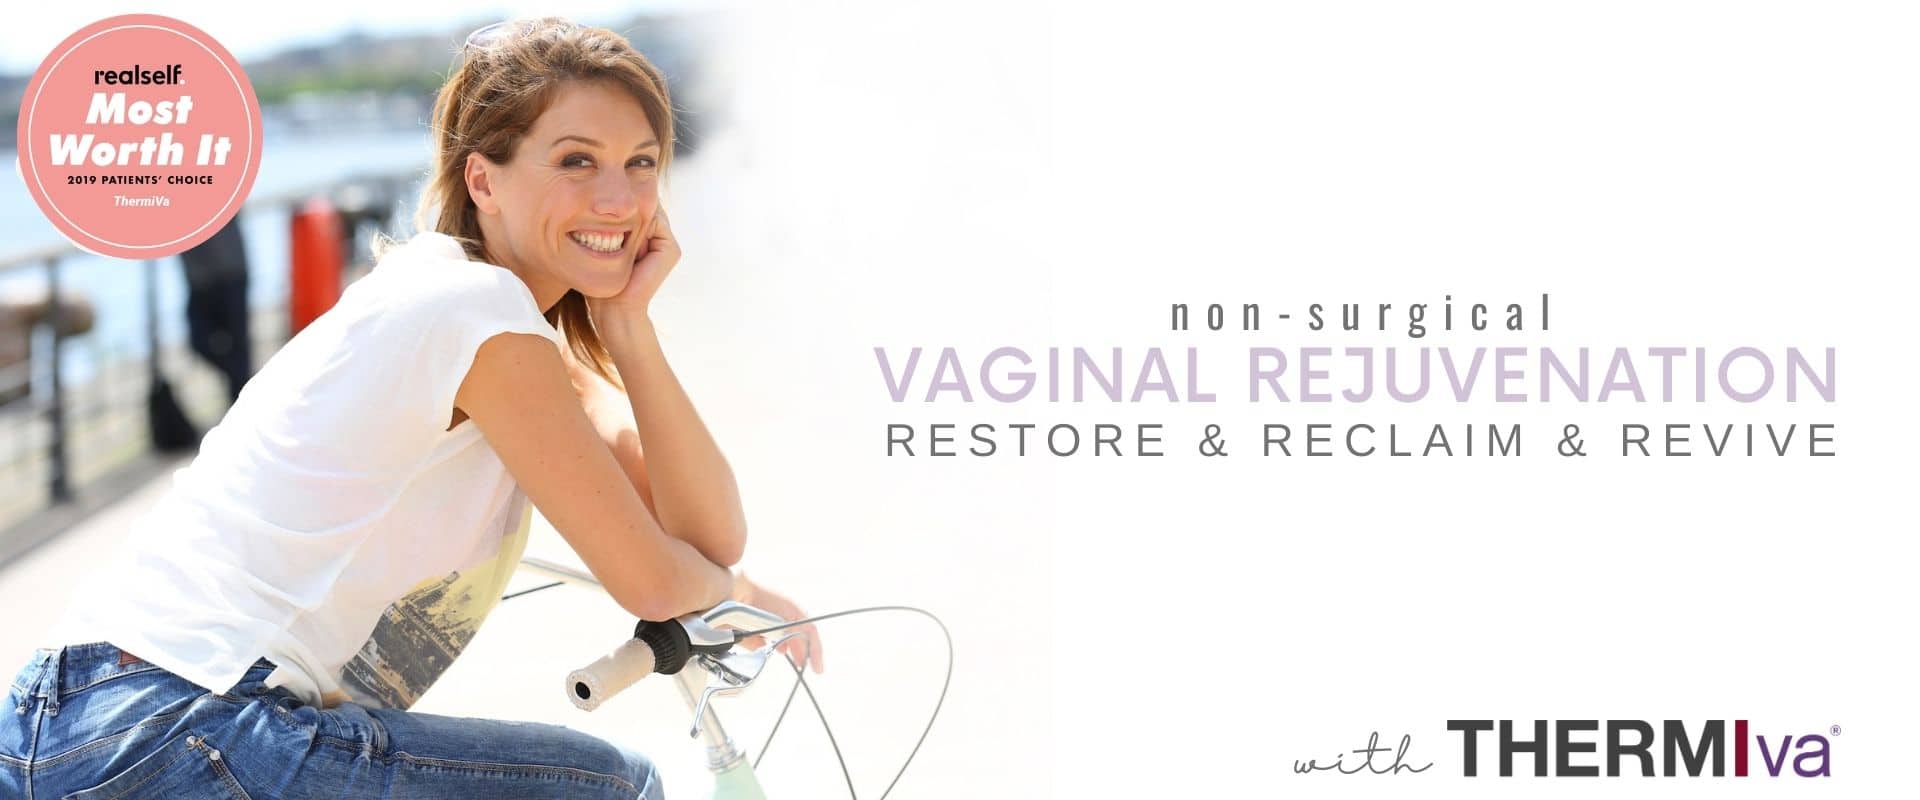 Woman smiling after successful Vaginal Rejuvenation with ThermiVa at Women's Health New England in Middleboro, MA.